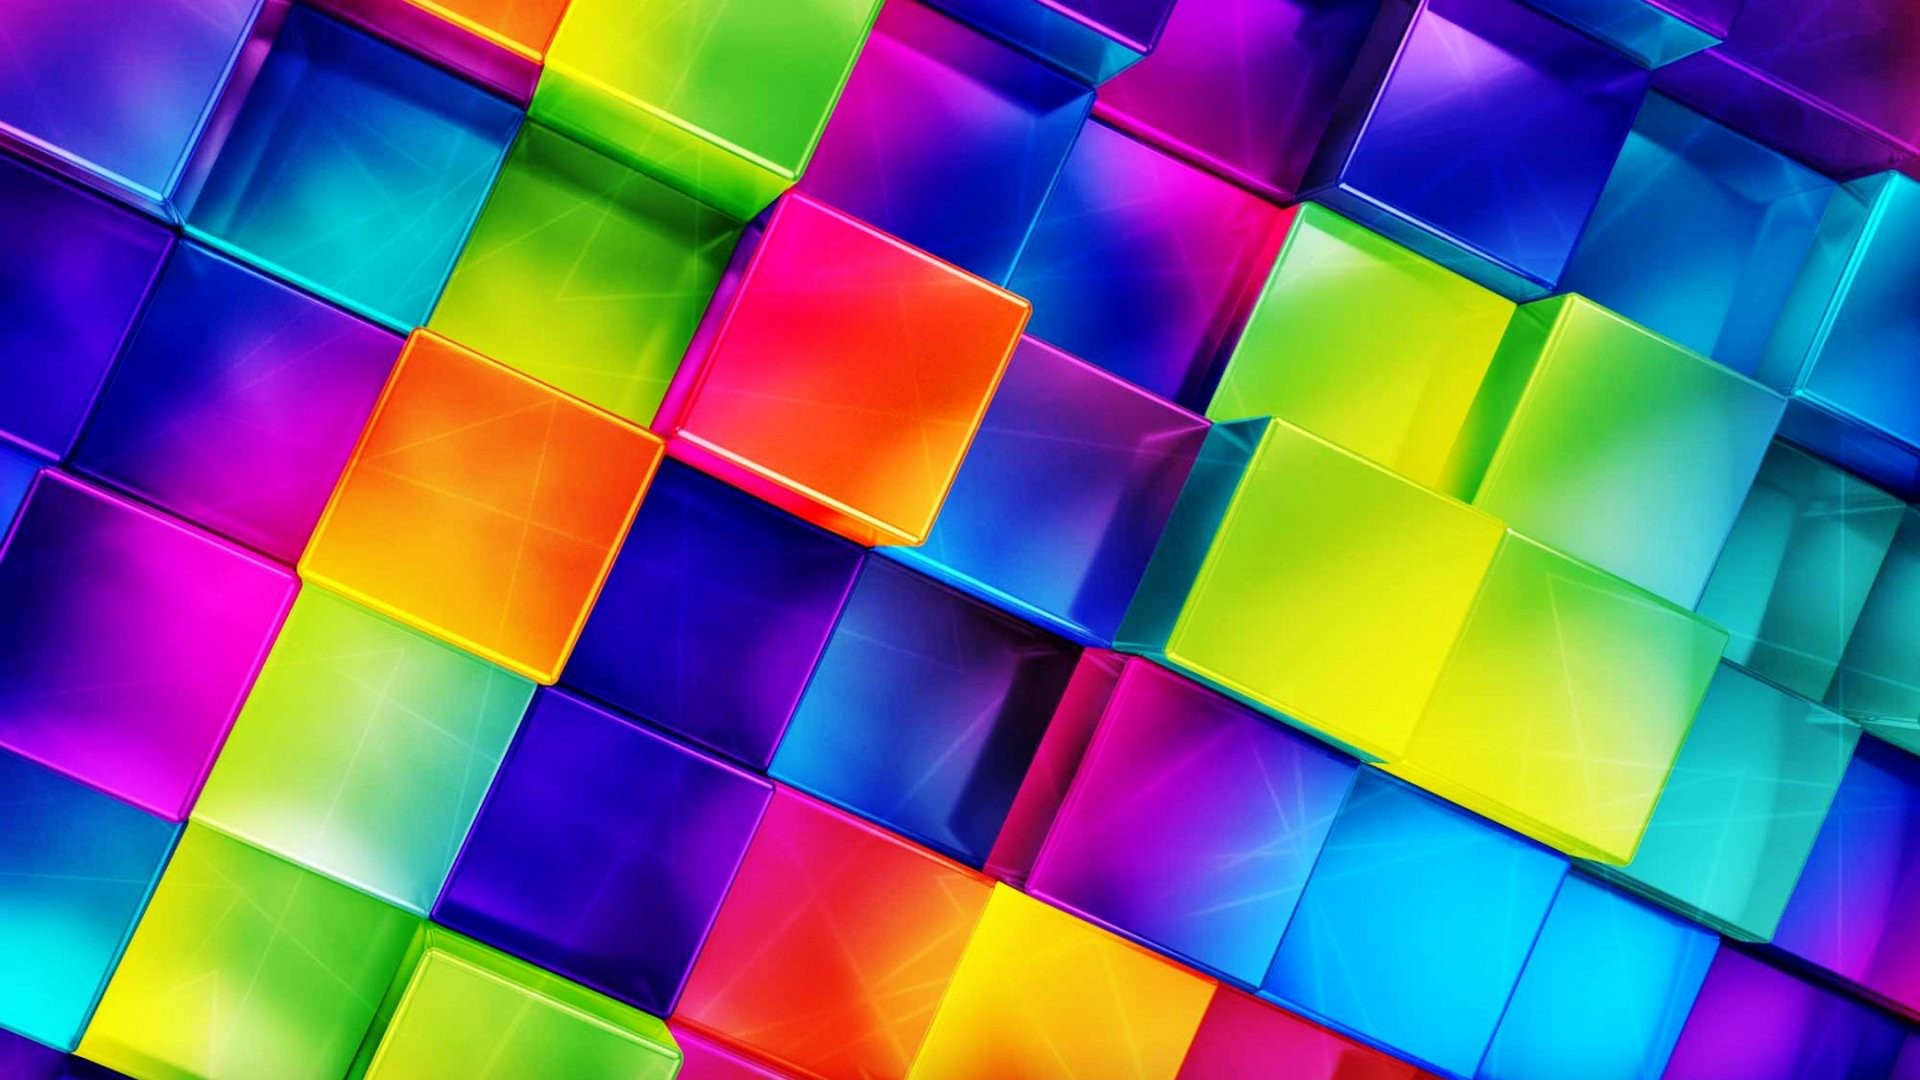 Abstract Colorful Wallpaper Hd Bright Colors - Just Dance 2014 Background , HD Wallpaper & Backgrounds